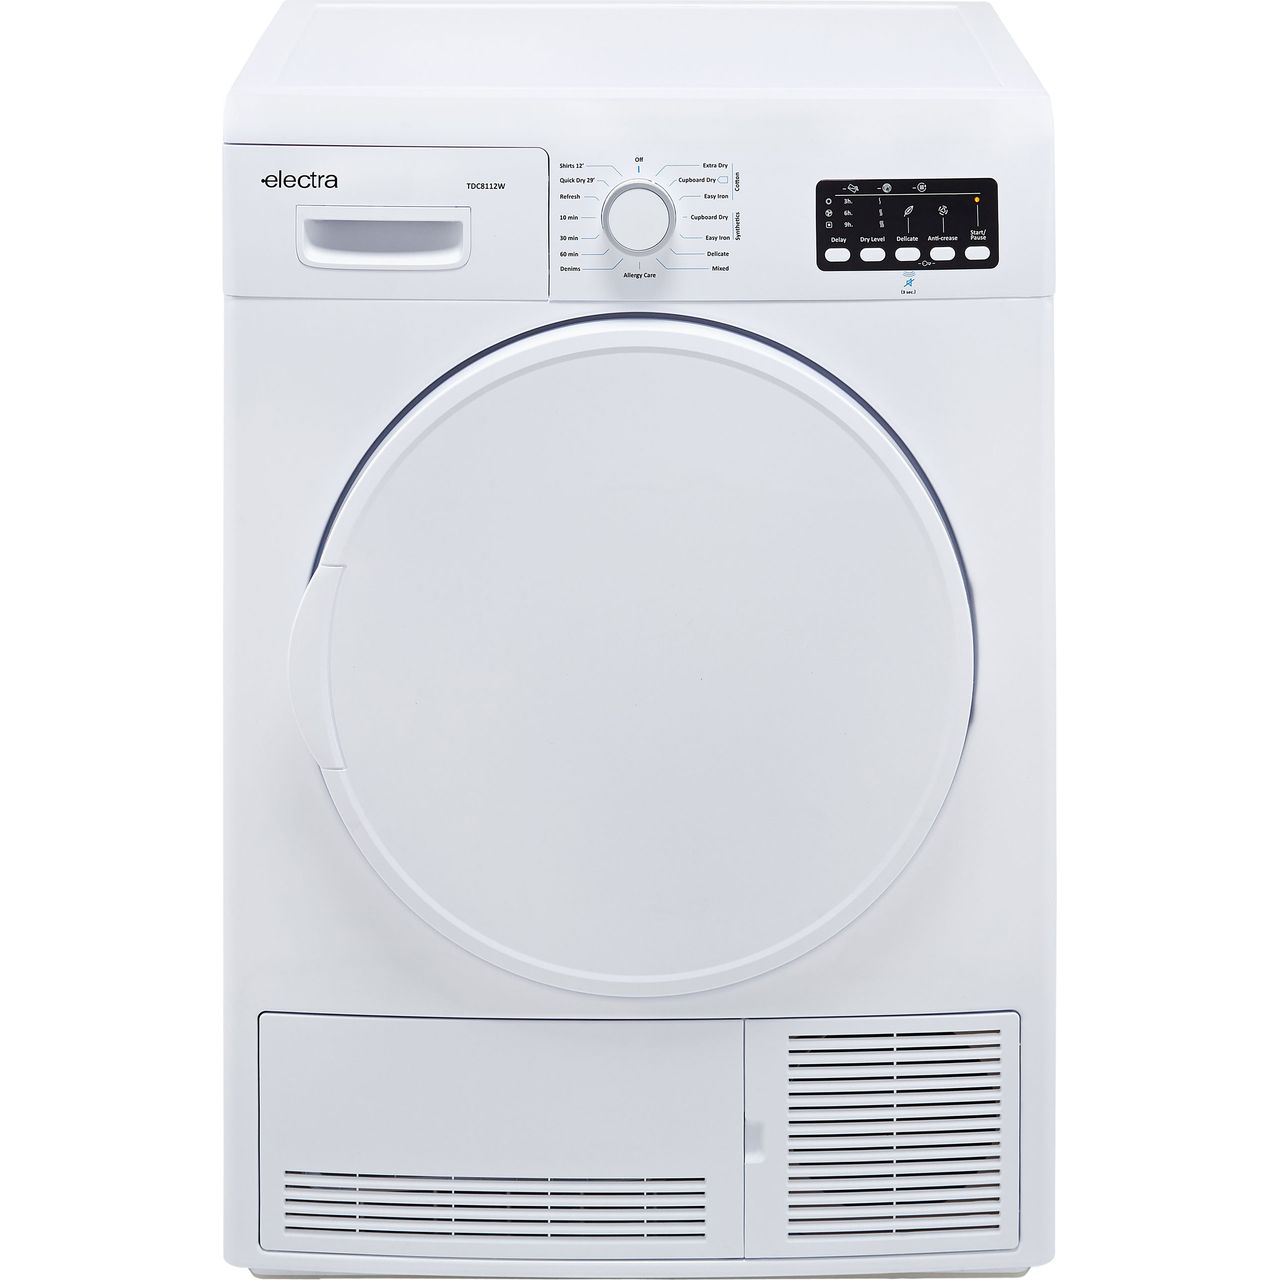 Electra TDC8112W 8Kg Condenser Tumble Dryer Review